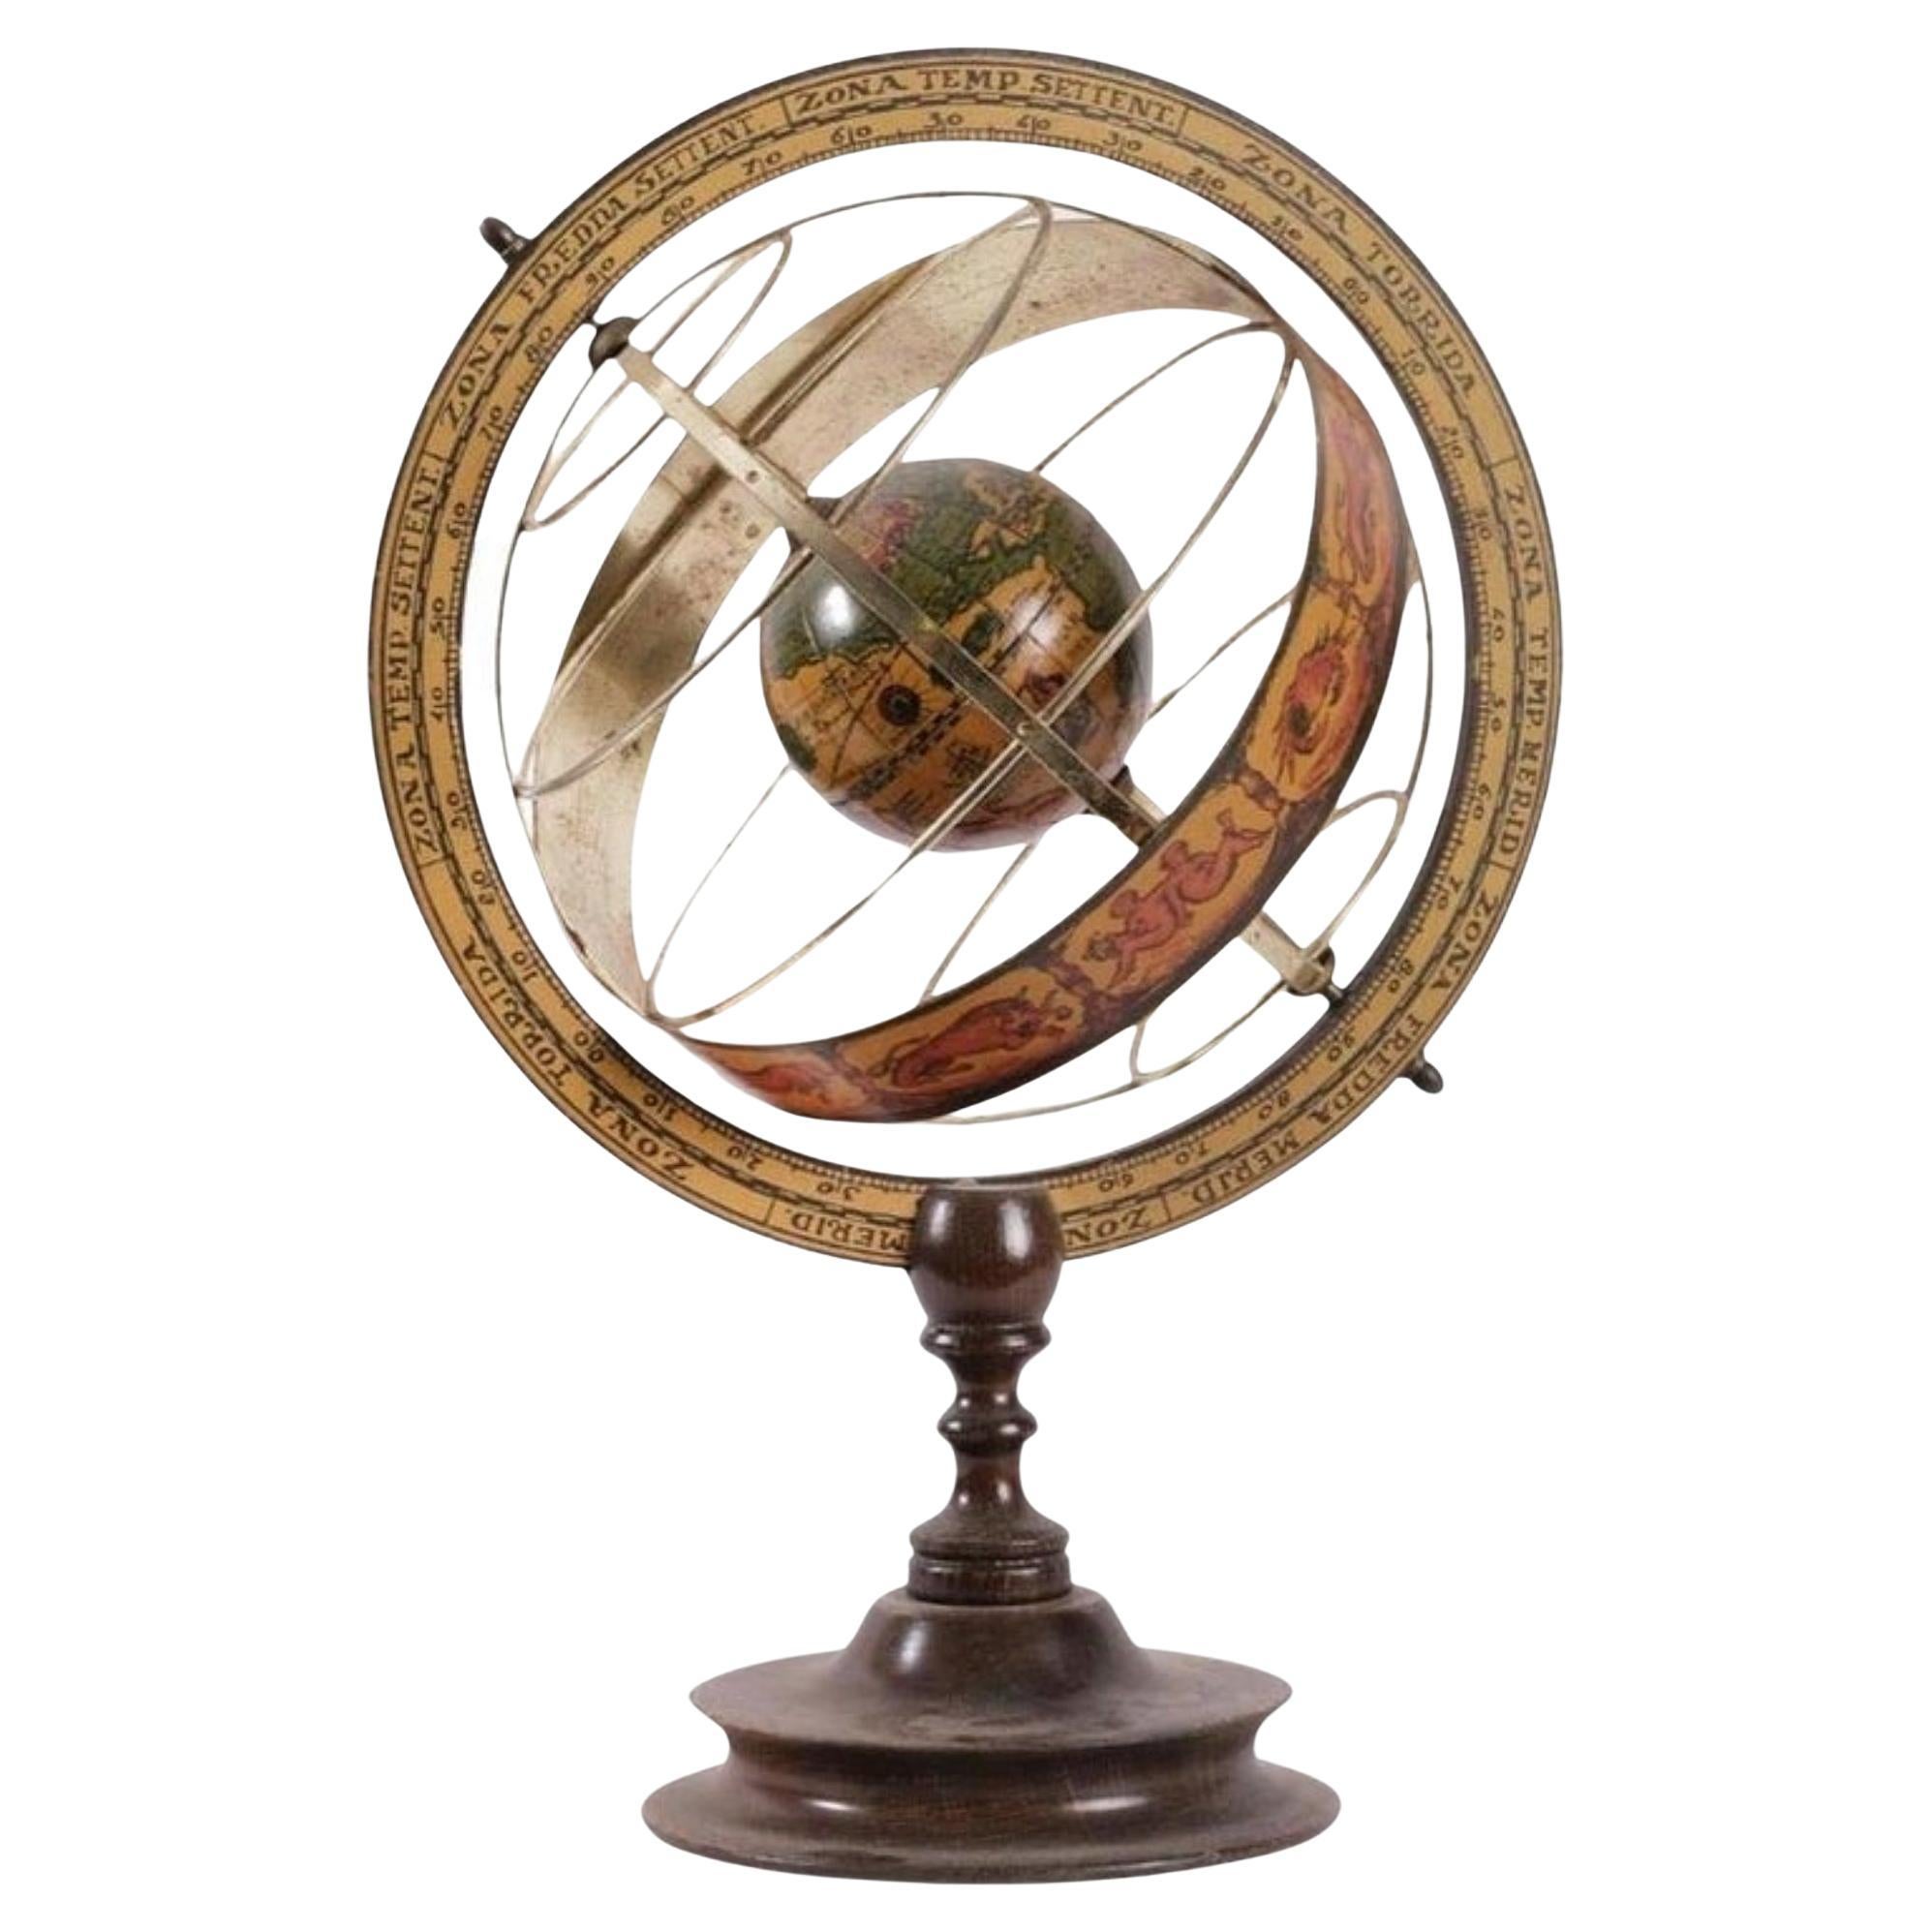 Beautiful Italian Metal Armillary Sphere with Wooden Base, Early 20th Century